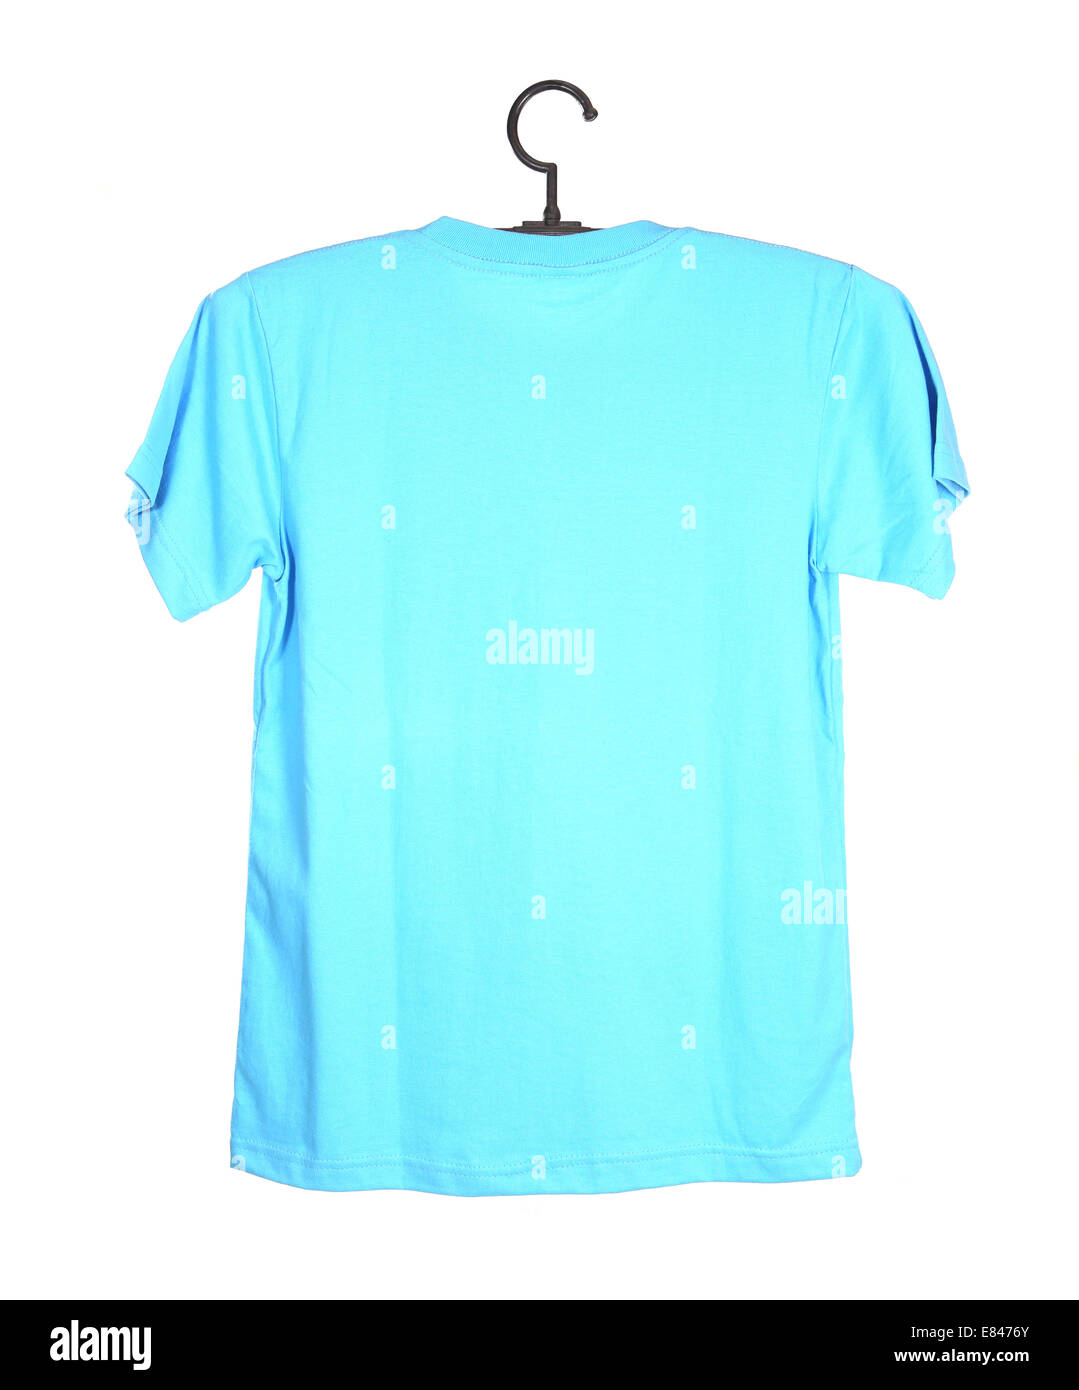 https://c8.alamy.com/comp/E8476Y/blue-t-shirt-template-on-hanger-back-side-isolated-on-white-background-E8476Y.jpg